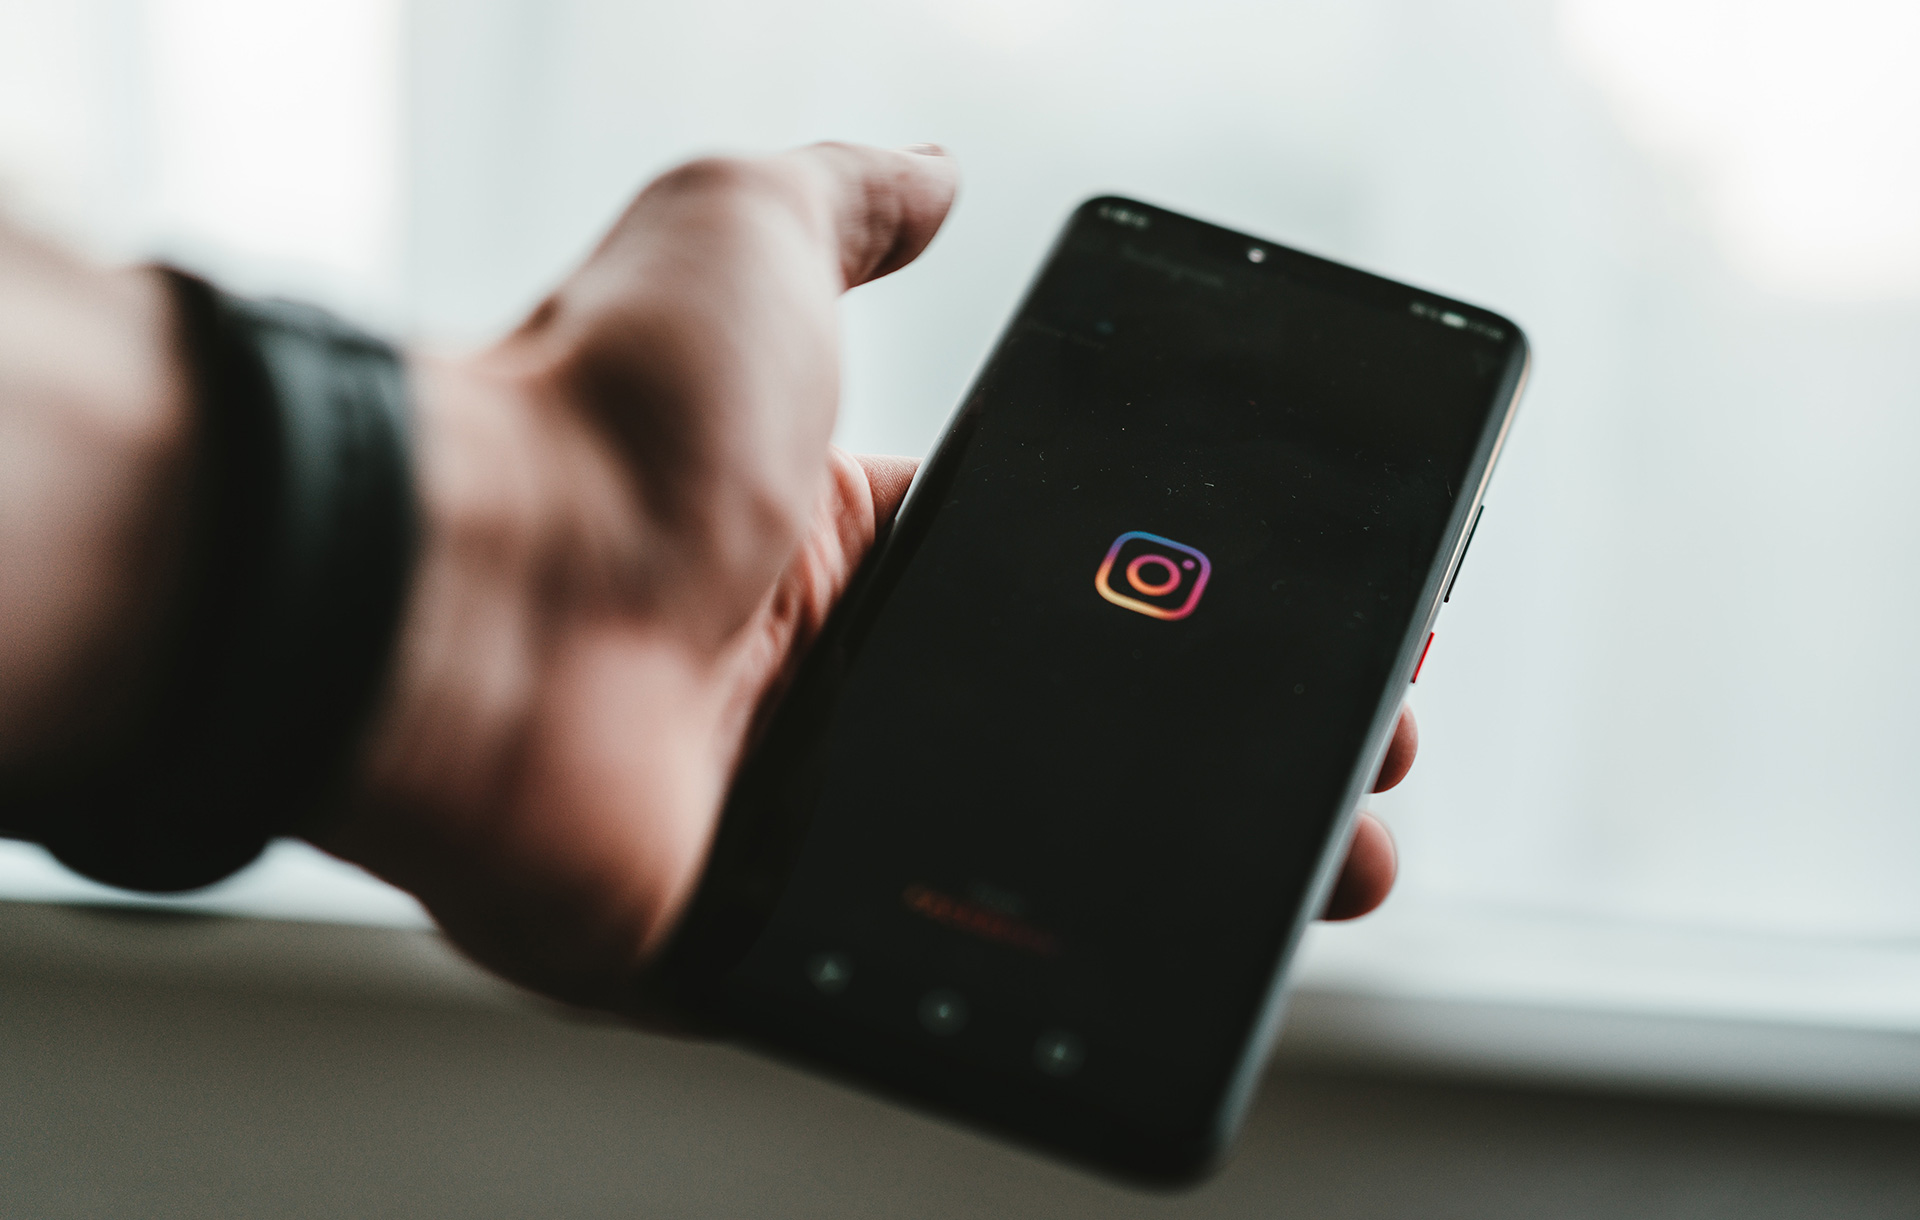 #InstagramAlgorithm: Will the end of Instagram’s organic reach mean more brands flocking to Snapchat?